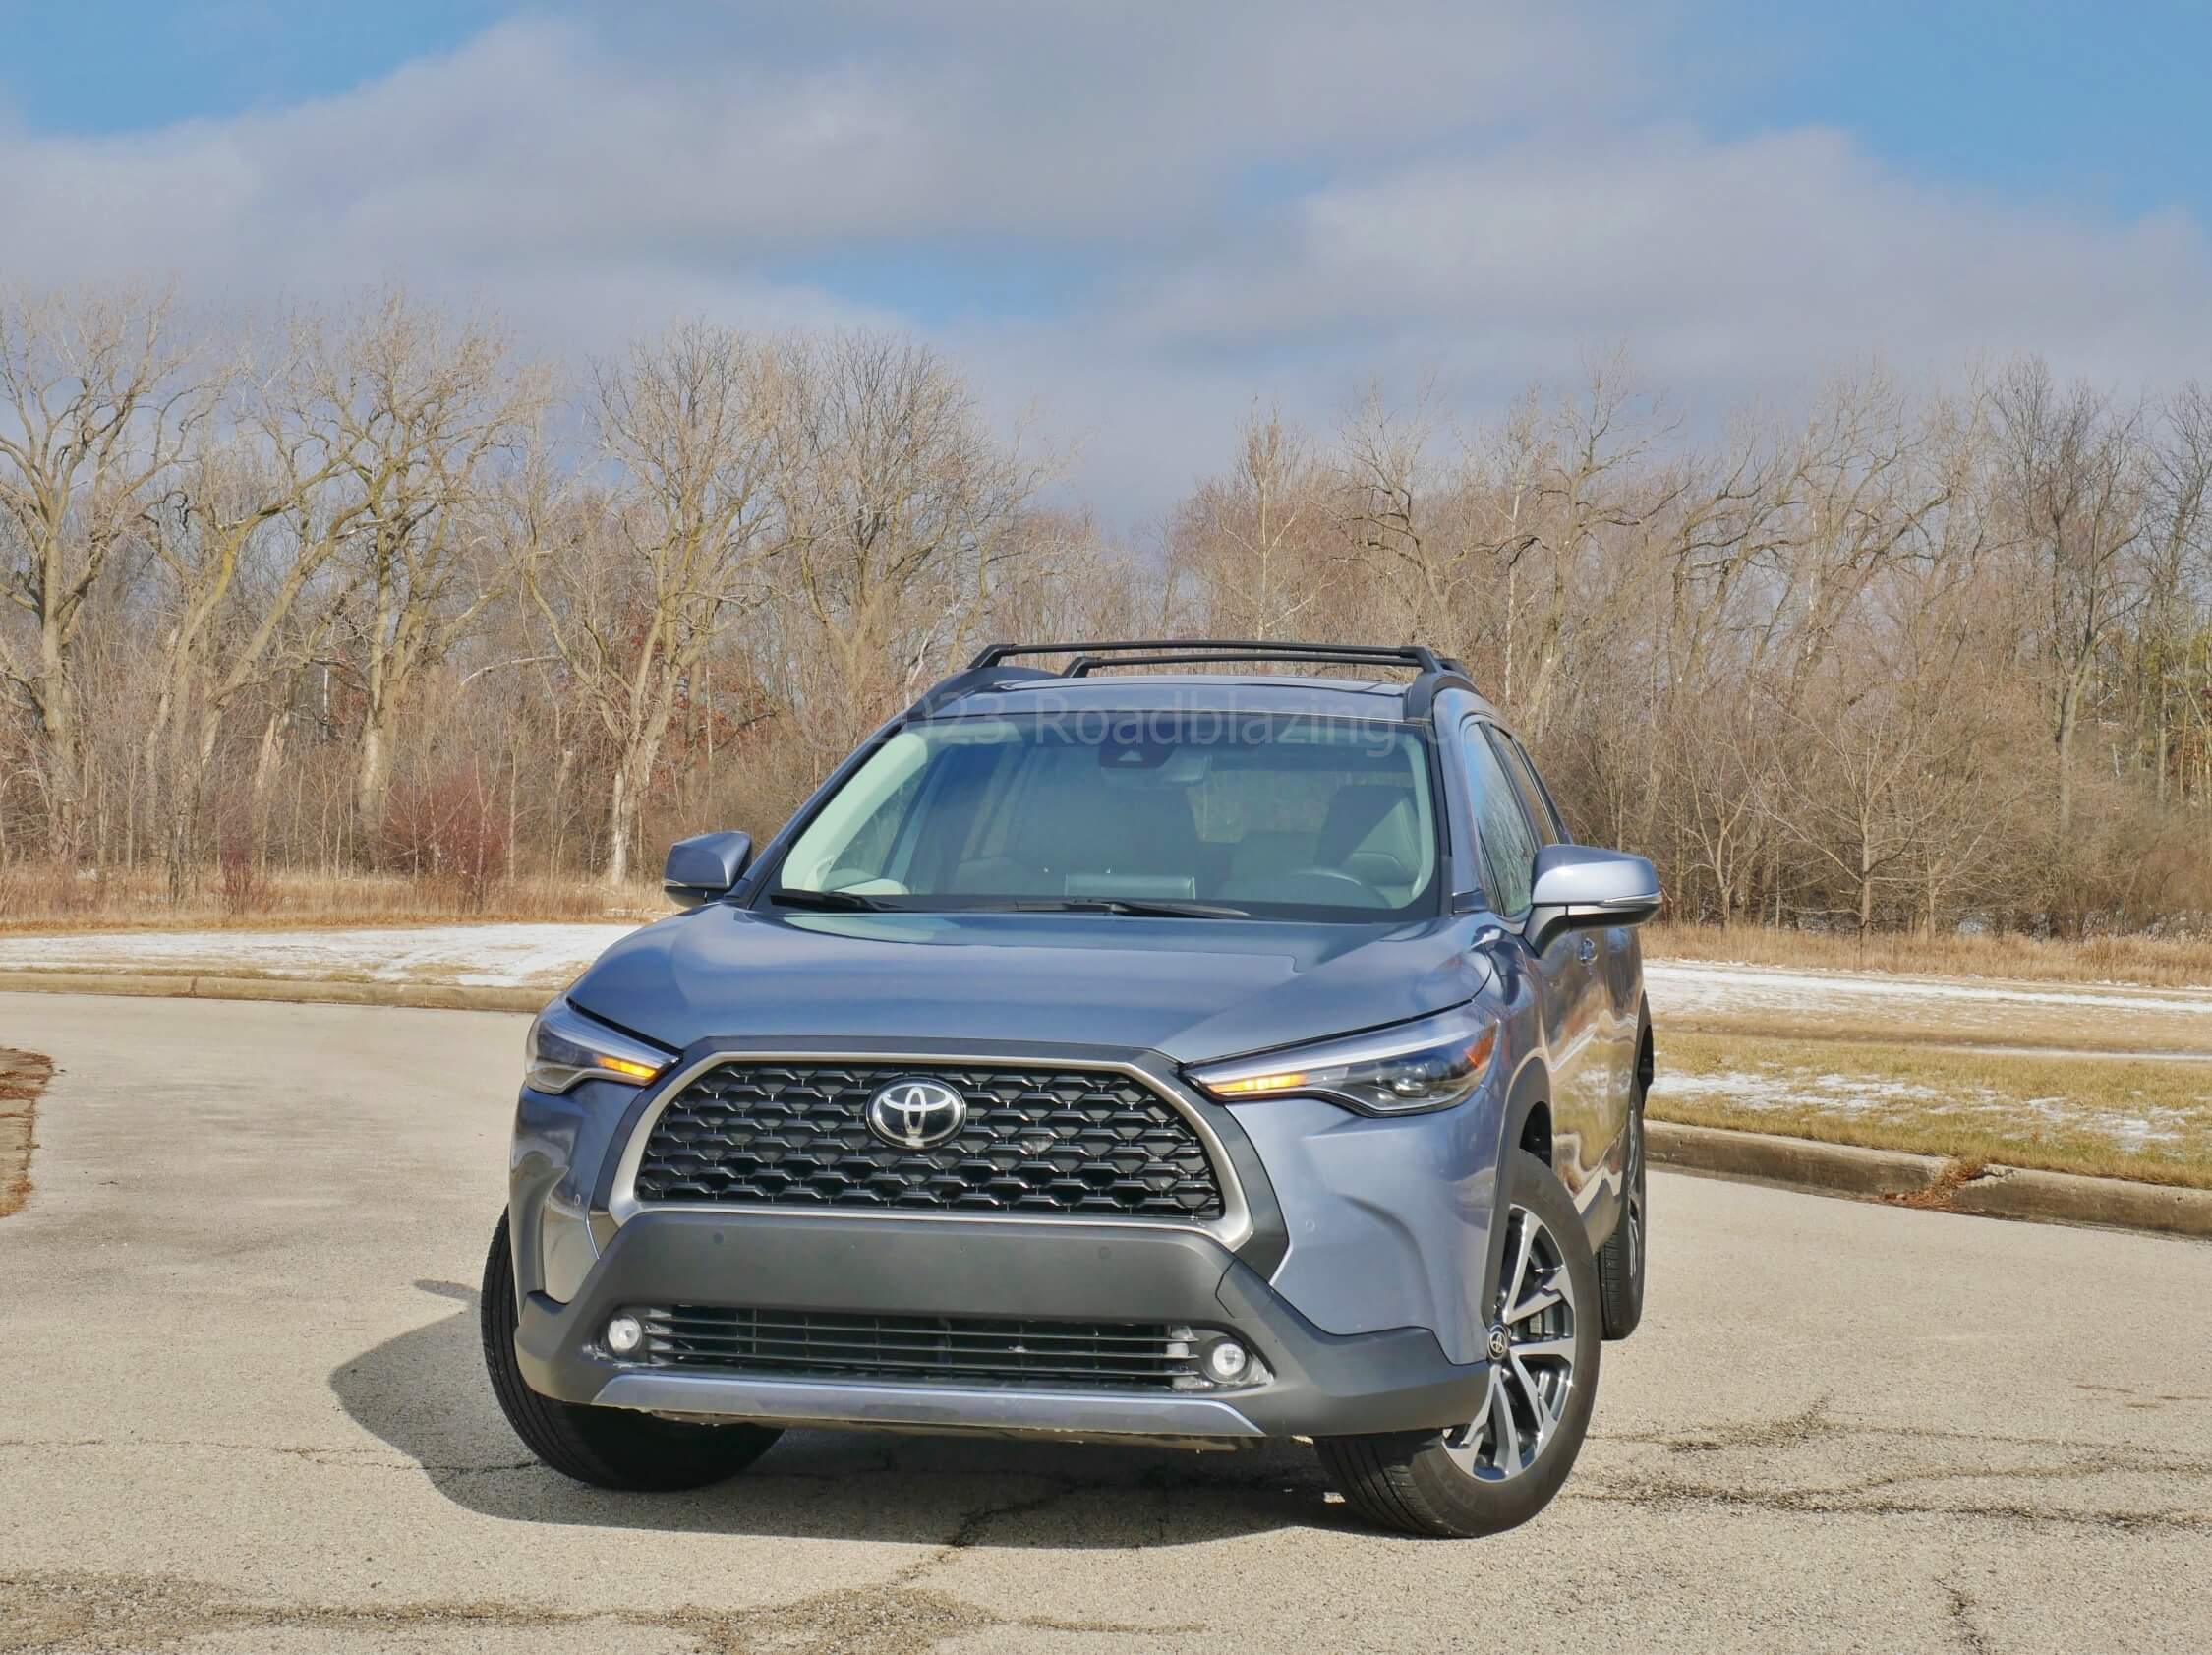 2022 Toyota Corolla Cross XLE AWD: prominent "truck" front end w/ chic details